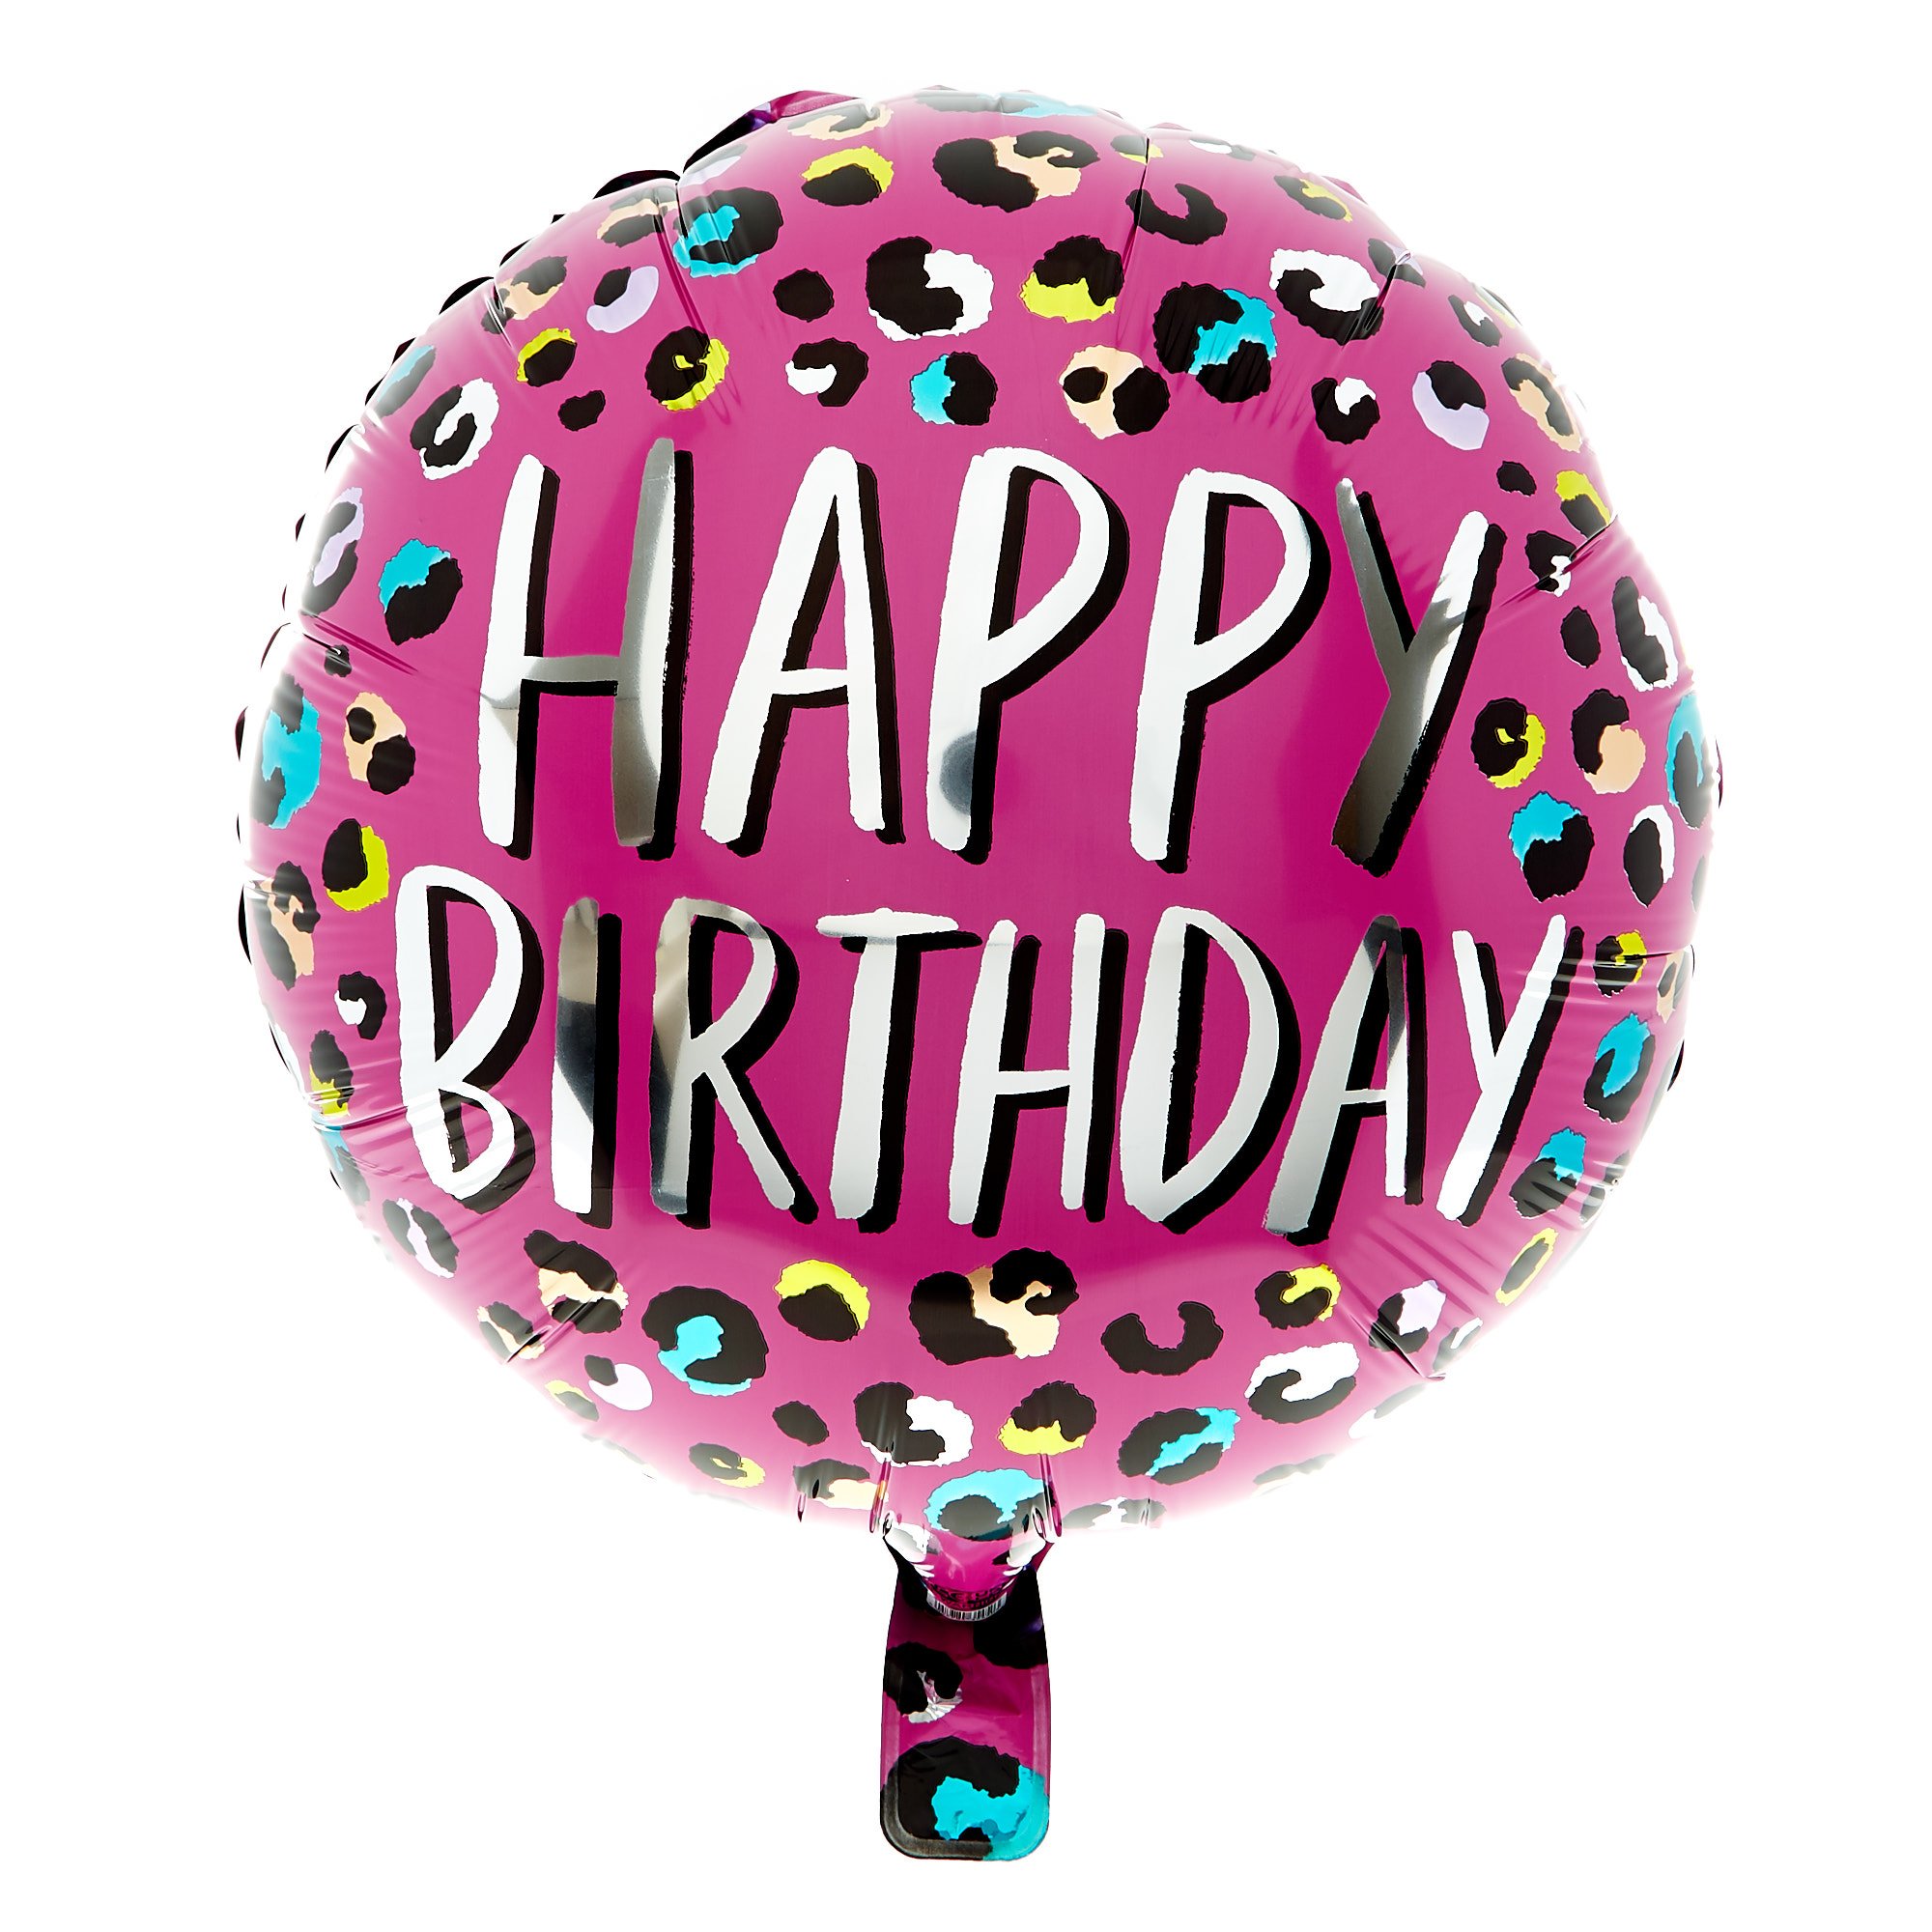 Leopard Print Happy Birthday Balloon Bouquet - DELIVERED INFLATED!